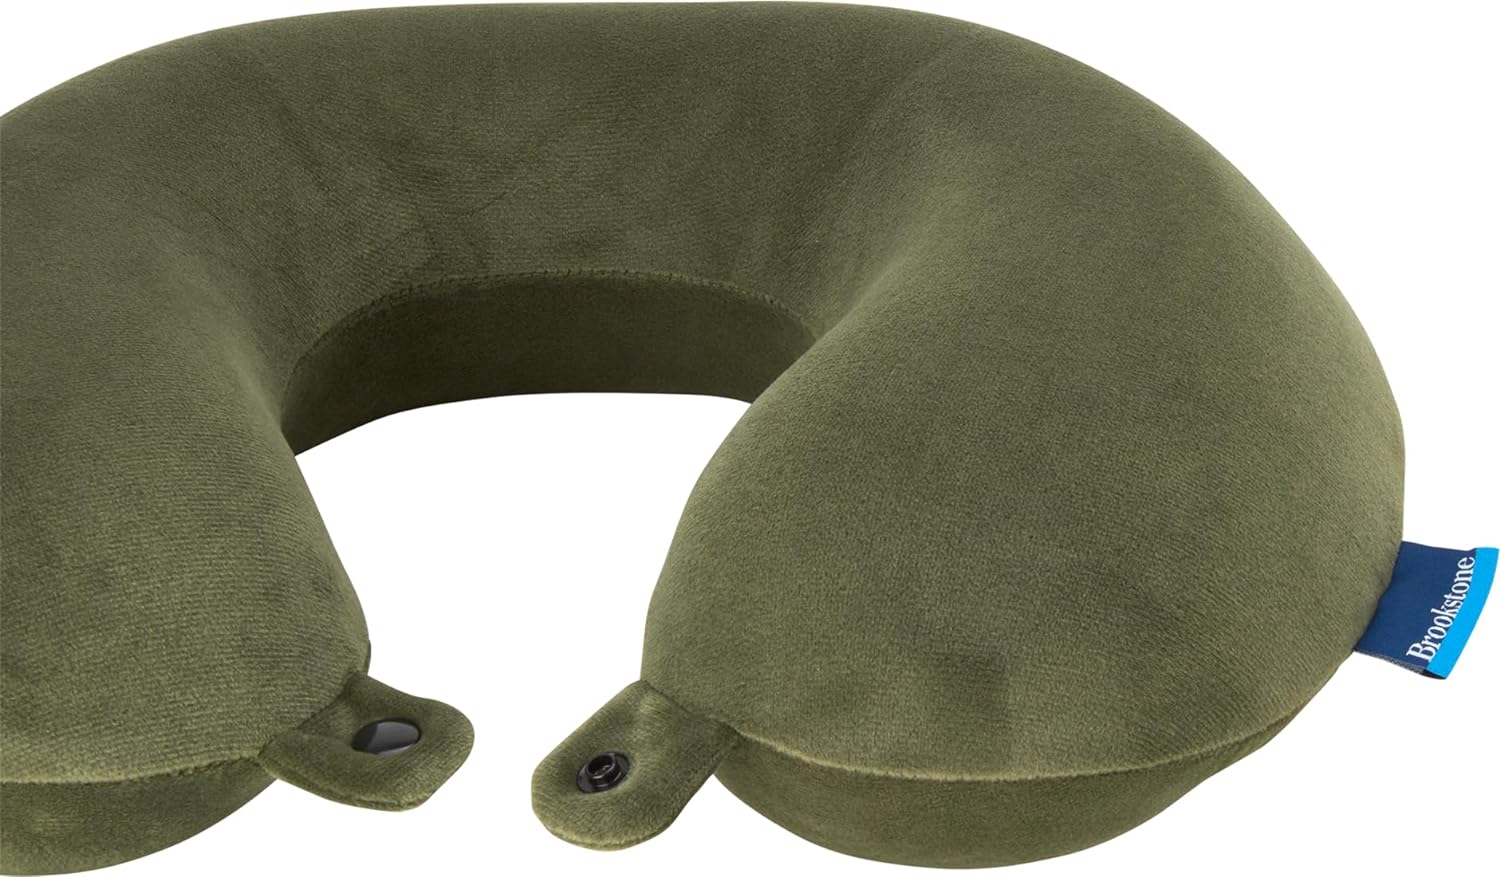 Brookstone Memory Foam Travel Neck Pillow for Vacations, Airplanes, Trains, Buses, and Cars, Size One Size, Olive